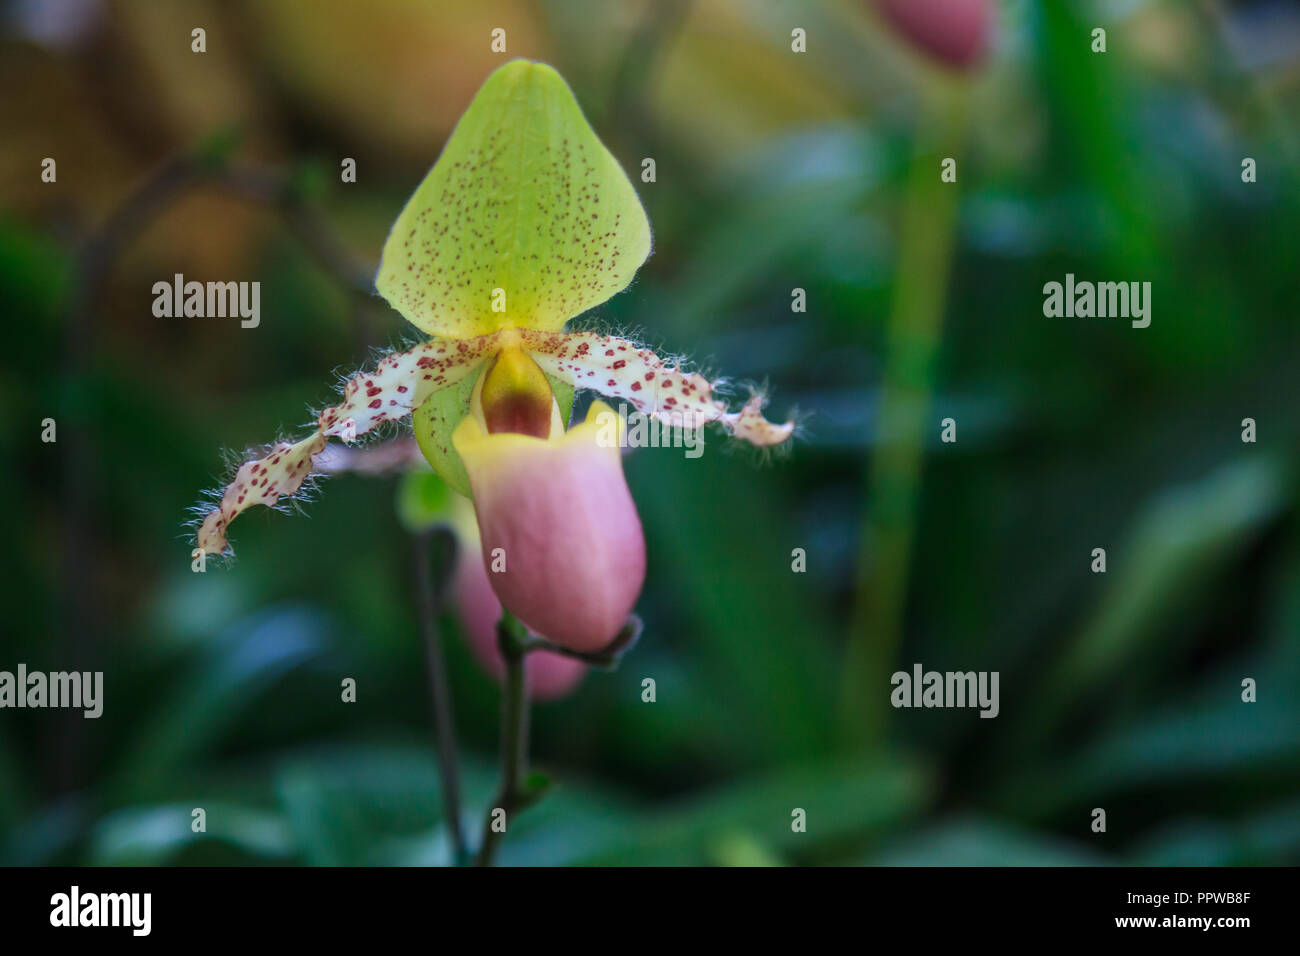 Flowers: Lady's slipper, lady slipper or slipper orchid Paphiopedilum, Paphiopedilum sukhakulii. The slipper-shaped lip of the flower serves as a trap Stock Photo